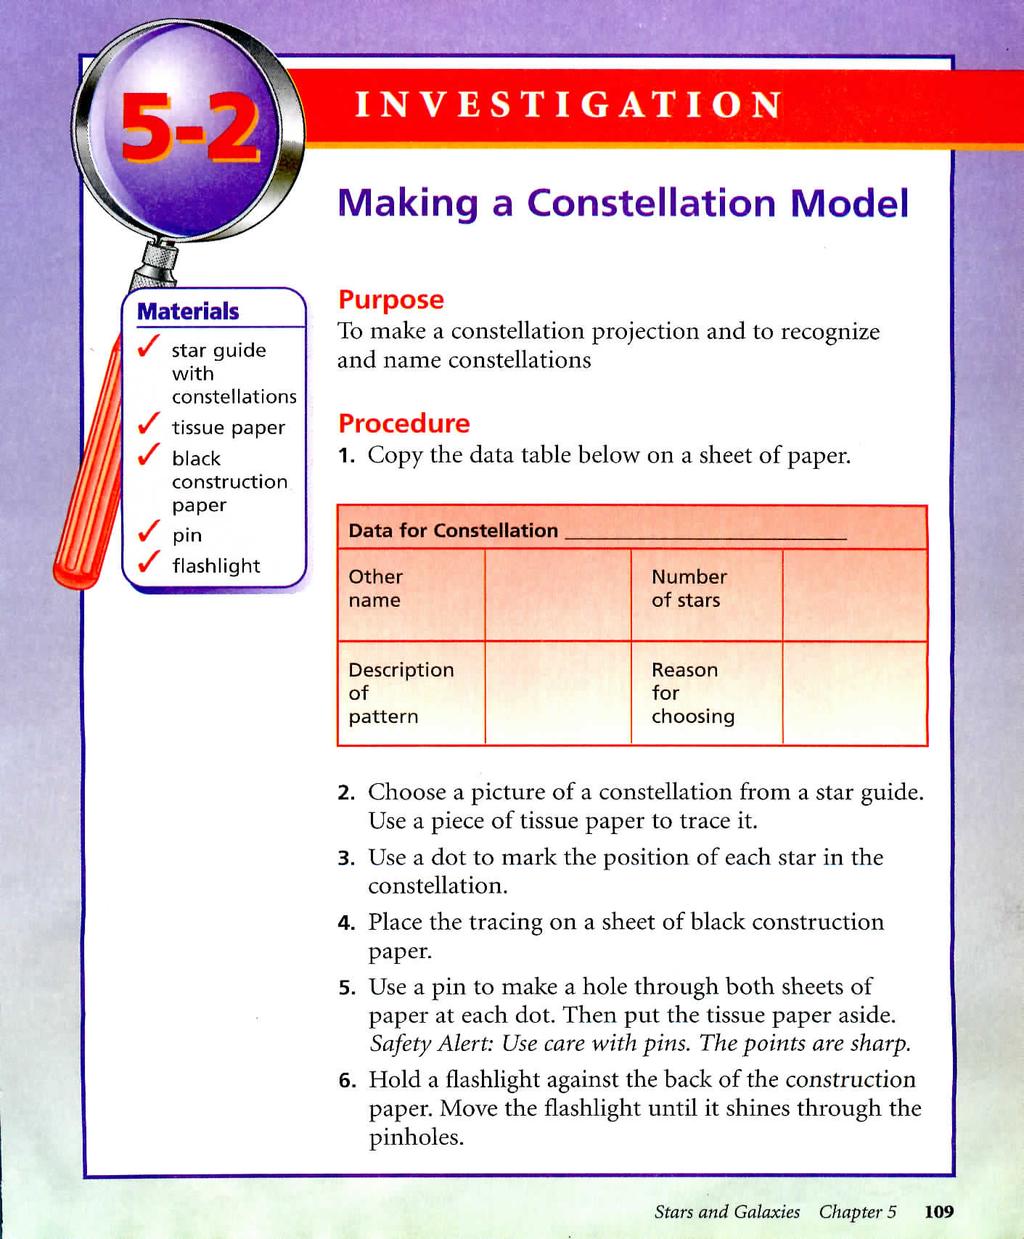 INVESTIGATION Making a Constellation Model Materials v v star guide with constellations tissue paper / black construction paper v pin i/" flashlight Purpose To make a constellation projection and to